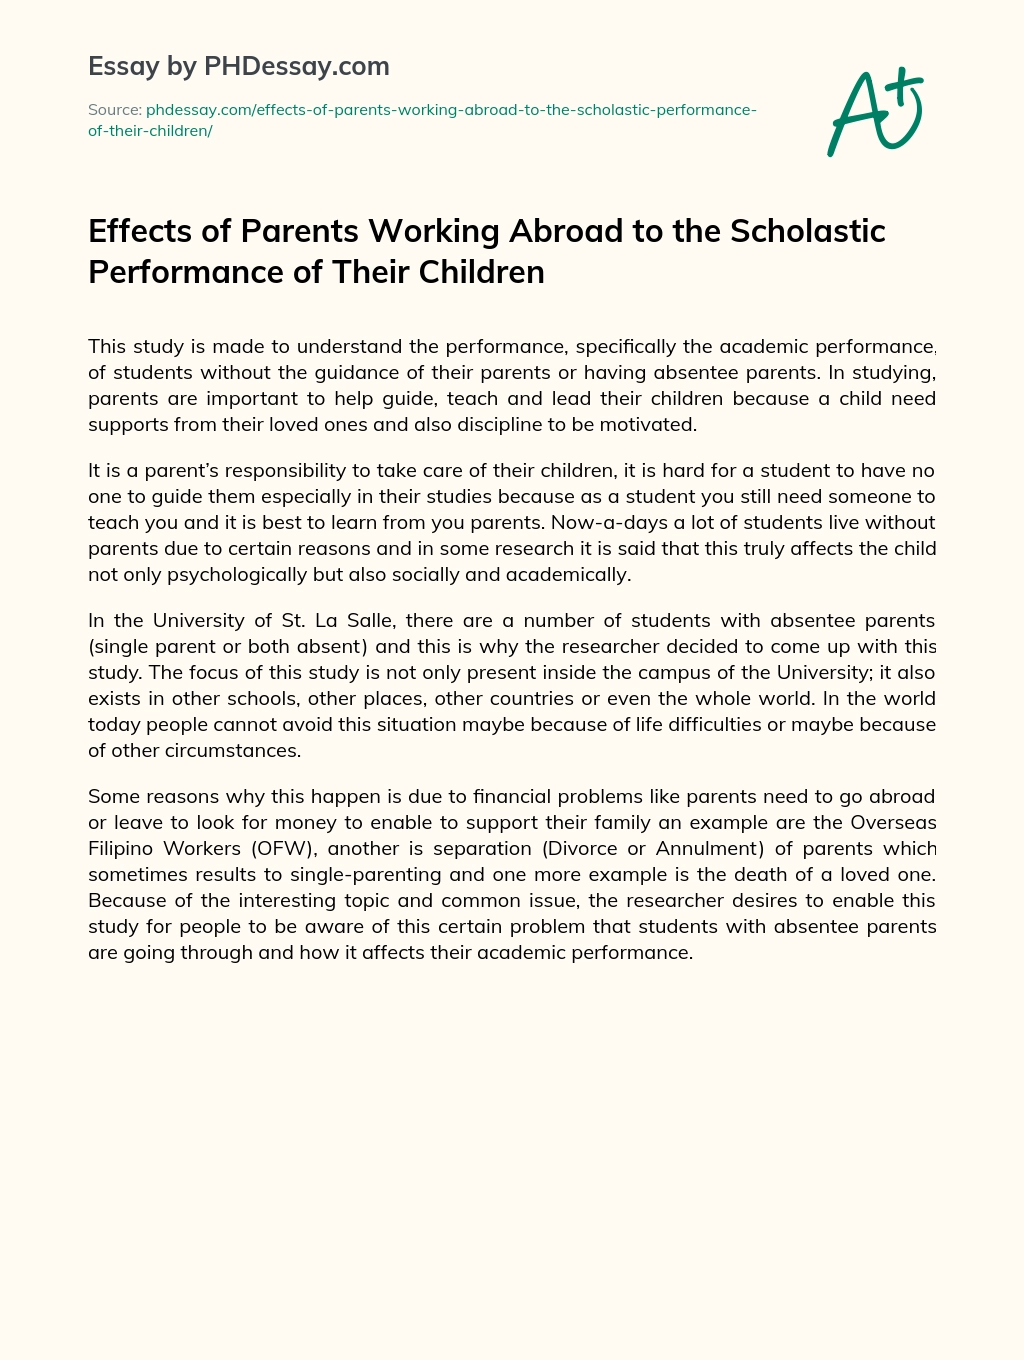 Effects of Parents Working Abroad to the Scholastic Performance of Their Children essay